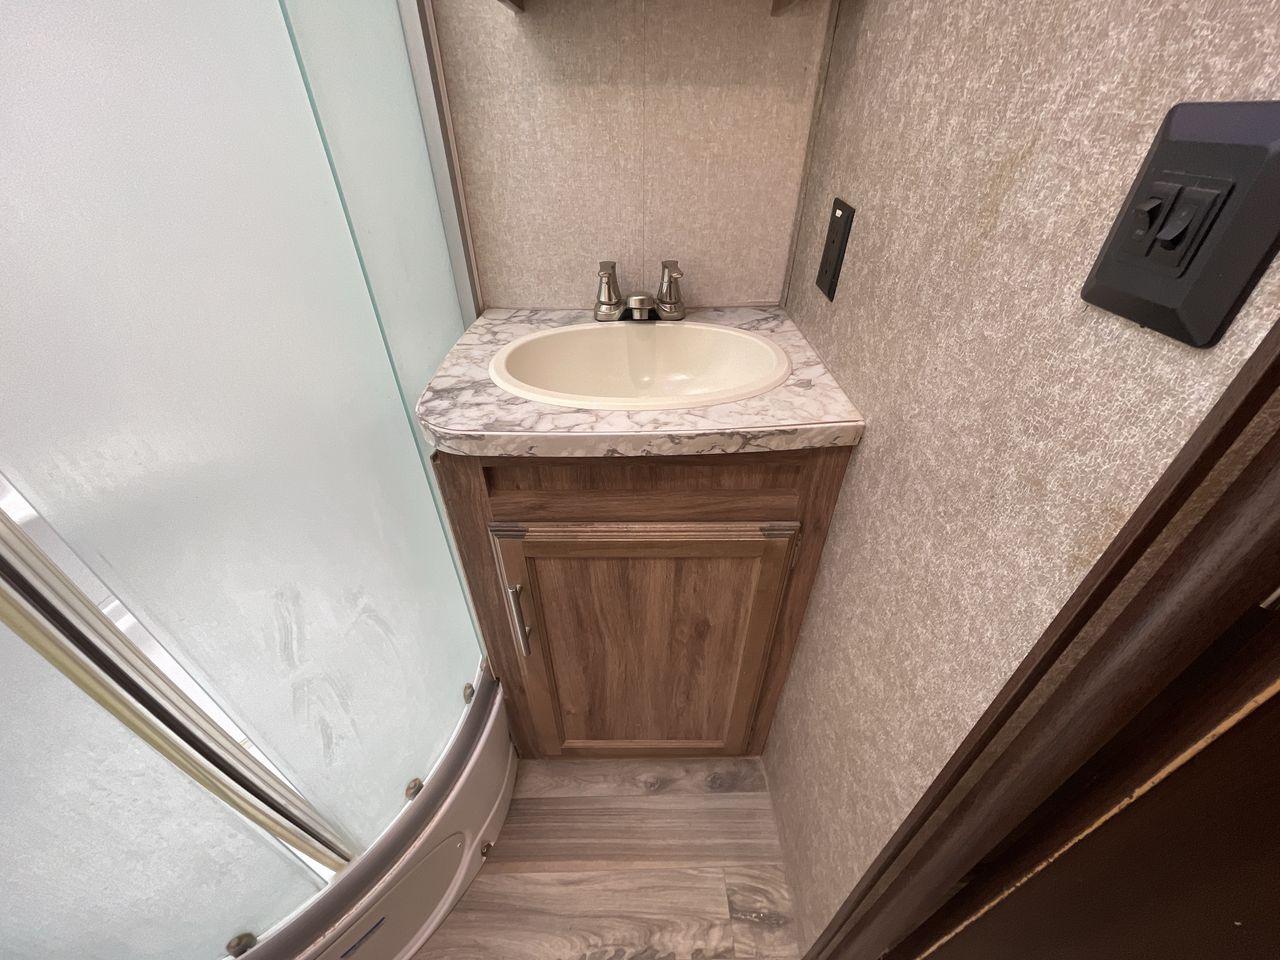 2018 WHITE JAYCO JAY FLIGHT 23MRB (1UJBJ0BN5J1) , Length: 28.17 ft | Dry Weight: 5,560 lbs. | Gross Weight: 7,250 lbs. | Slides: 1 transmission, located at 4319 N Main St, Cleburne, TX, 76033, (817) 678-5133, 32.385960, -97.391212 - The 2018 Jayco Jay Flight 23MRB is a travel trailer that encapsulates both compactness and luxury for unparalleled camping experiences. Spanning 28 feet in length, this model boasts a thoughtfully arranged interior featuring a single slide-out, seamlessly amplifying the living space. The Jay Flight - Photo #16